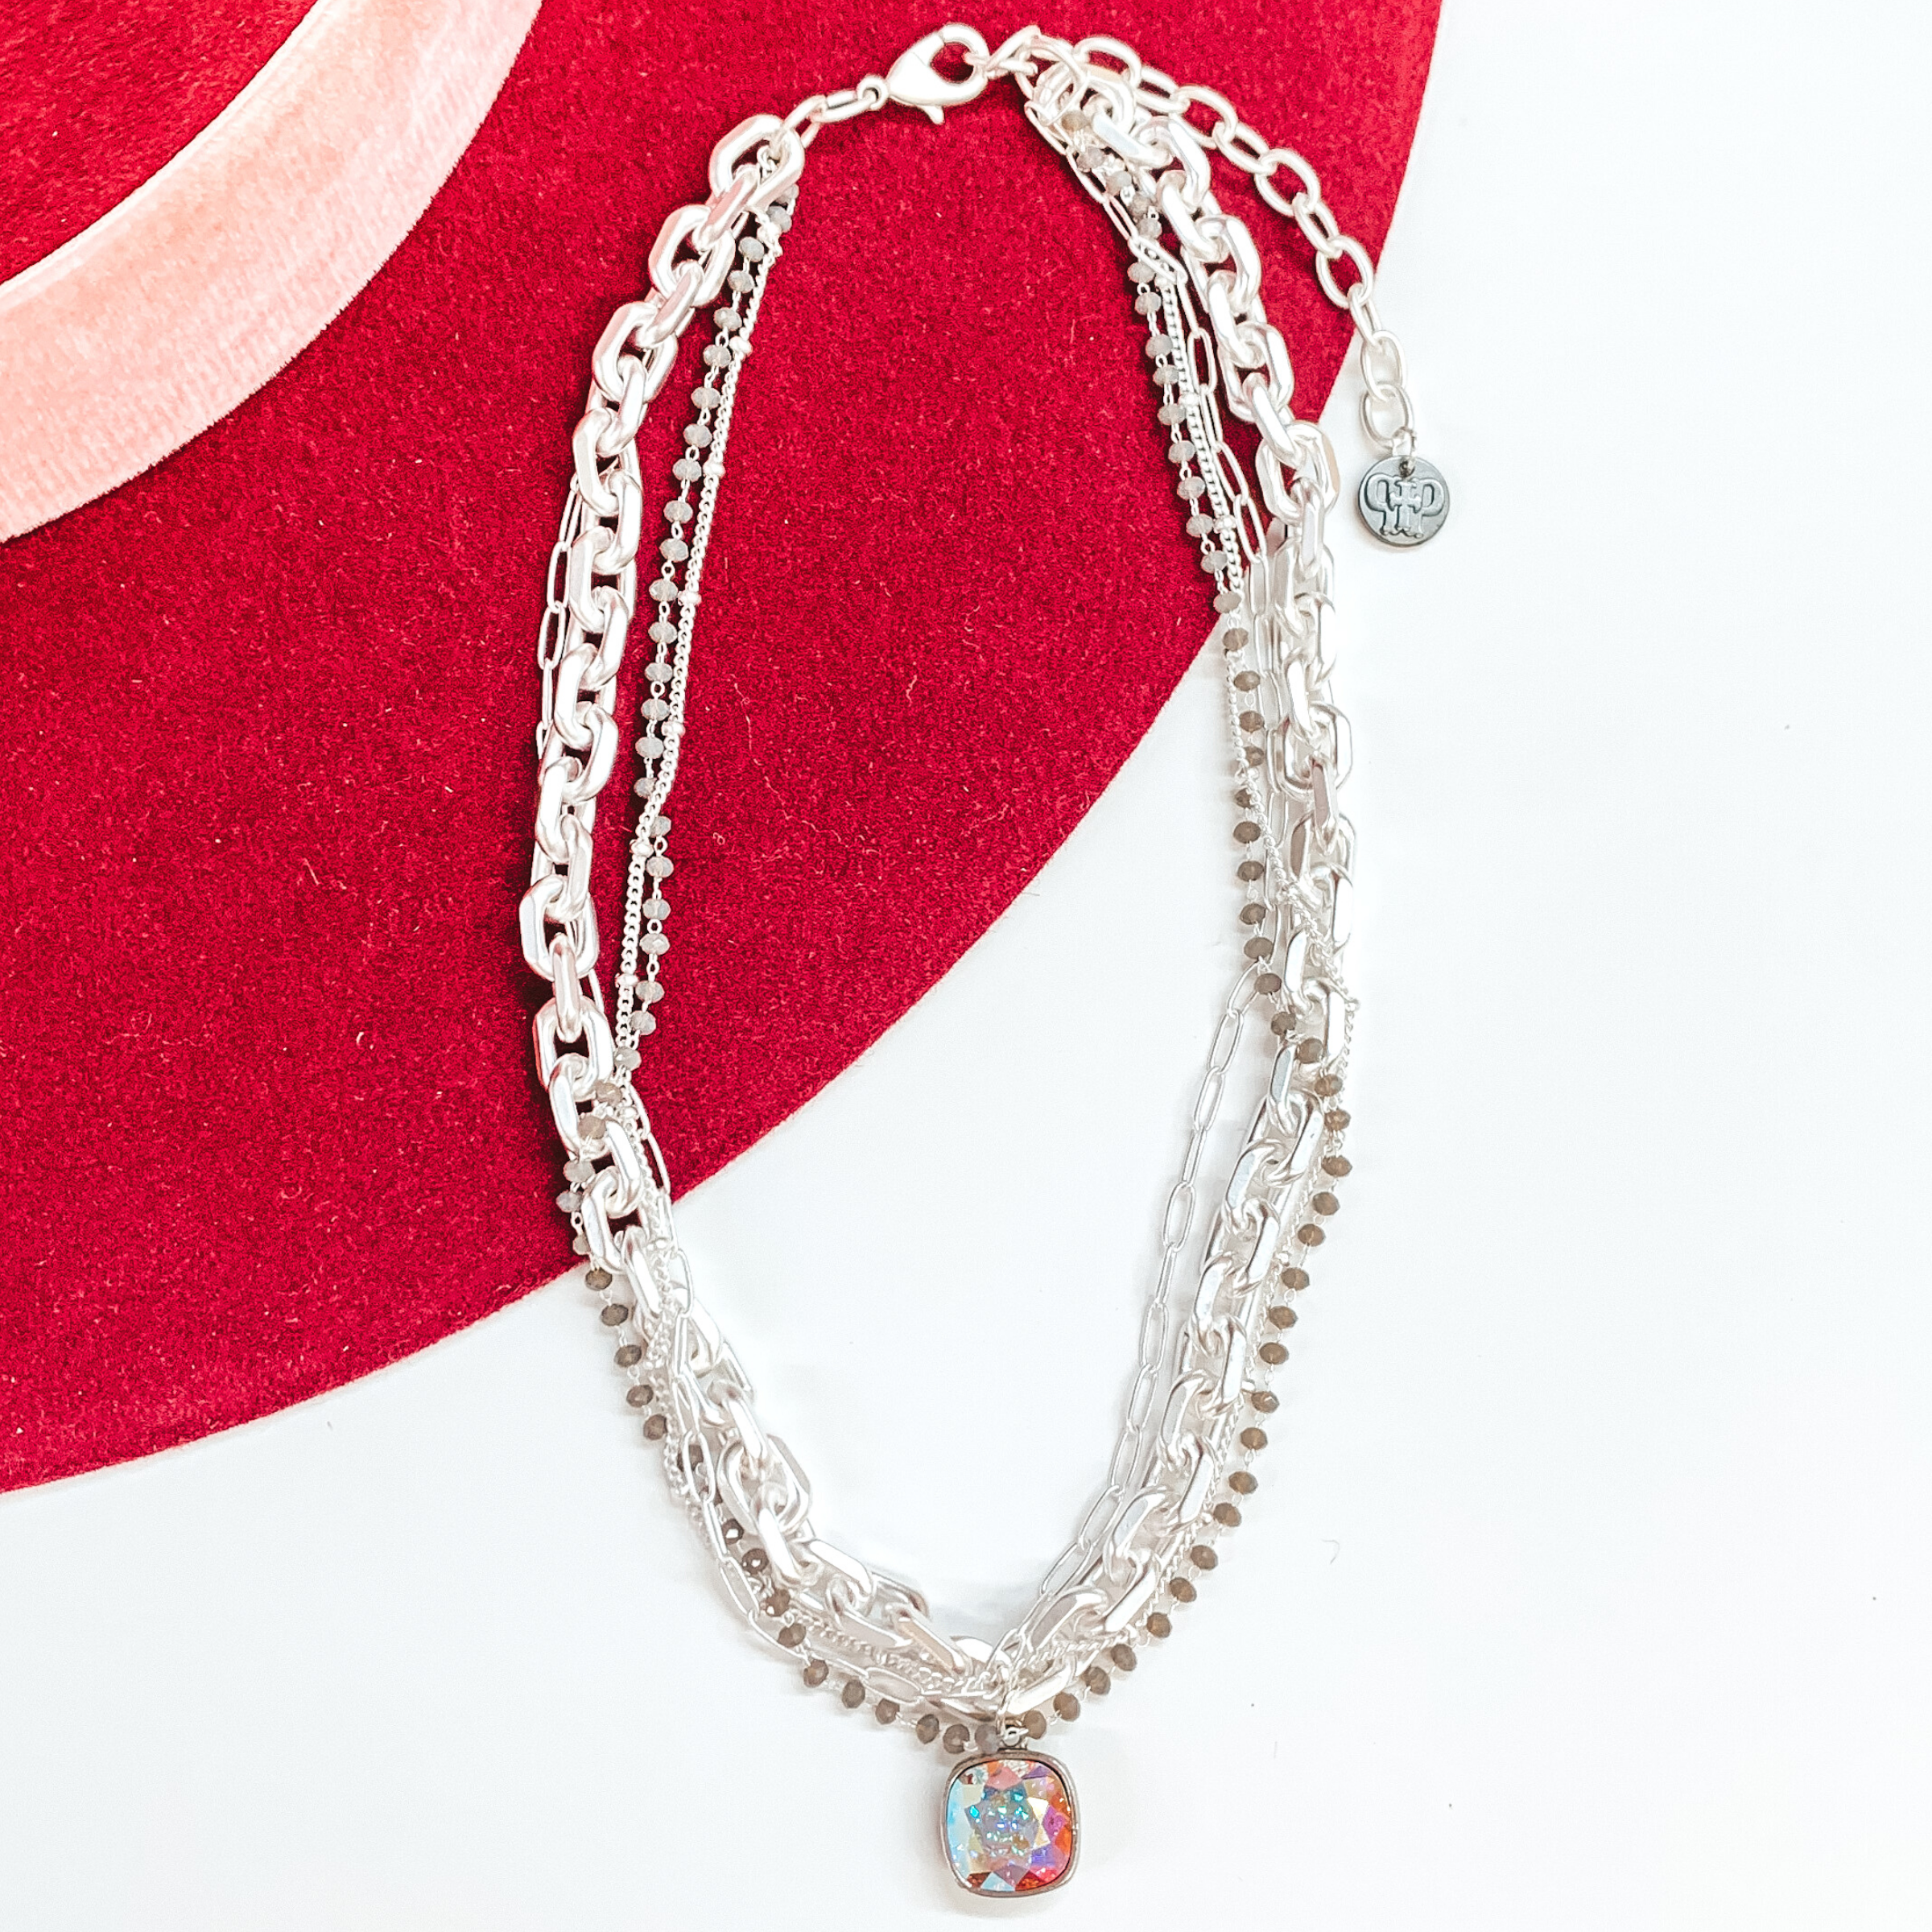 Silver, adjustable necklace that includes a thick chain strand, crystal beaded strand, a thin paperlcip chain strand, and a small chain strand. There is also an AB cushion cut crystal drop. This necklace is pictured on a white and red background.